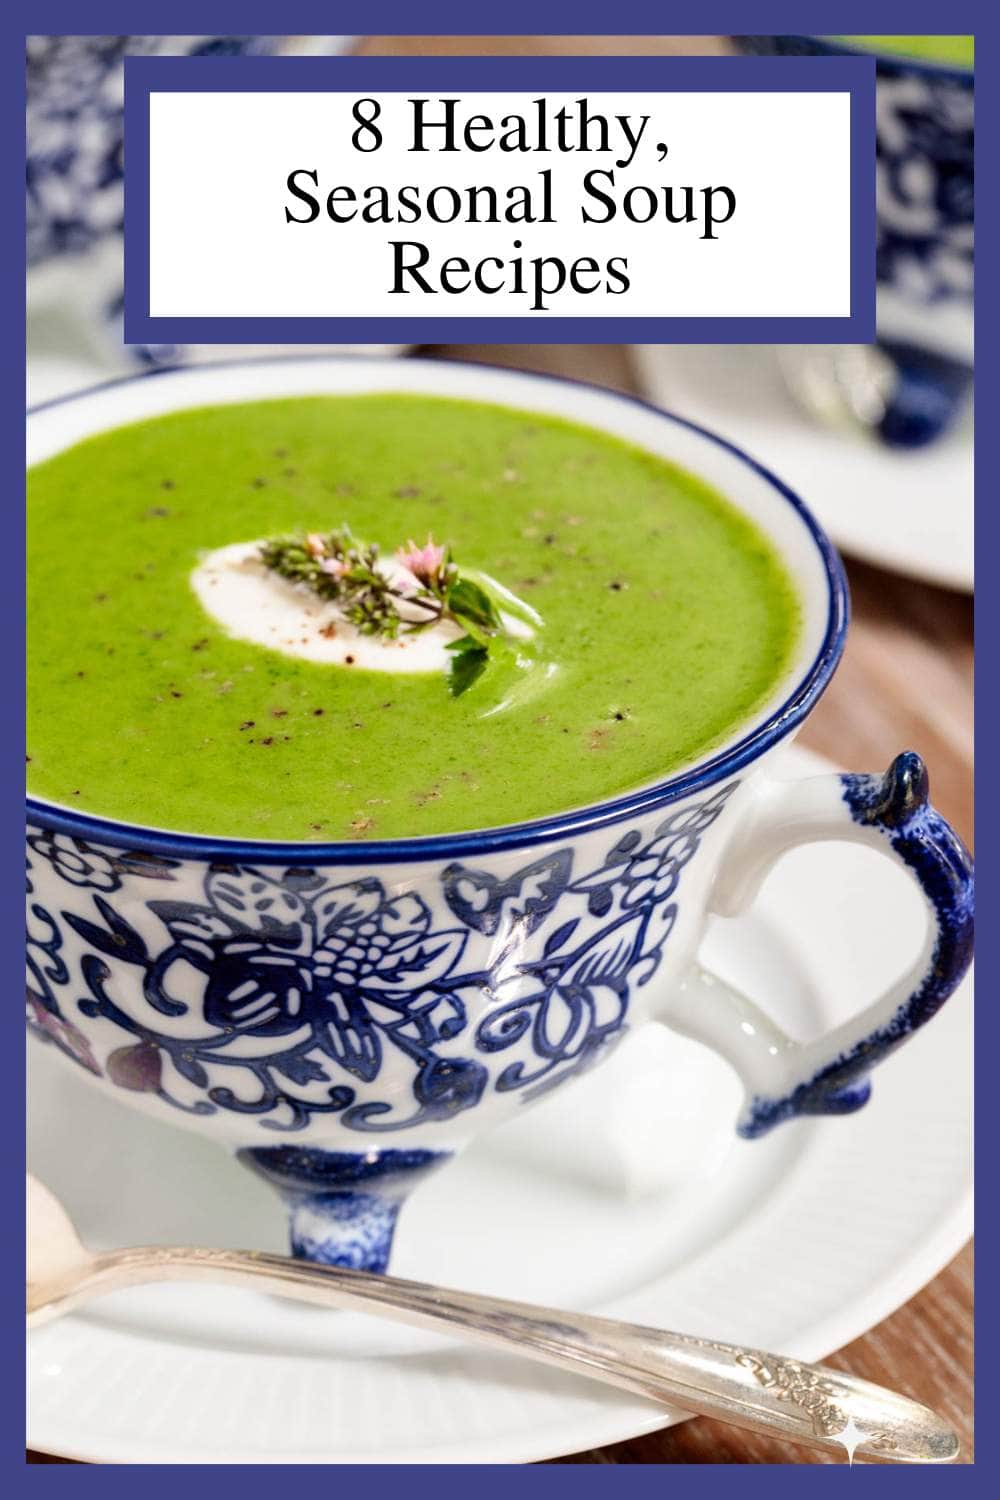 8 Light, Healthy Seasonal Soup Recipes to Put a Little Spring into your Step